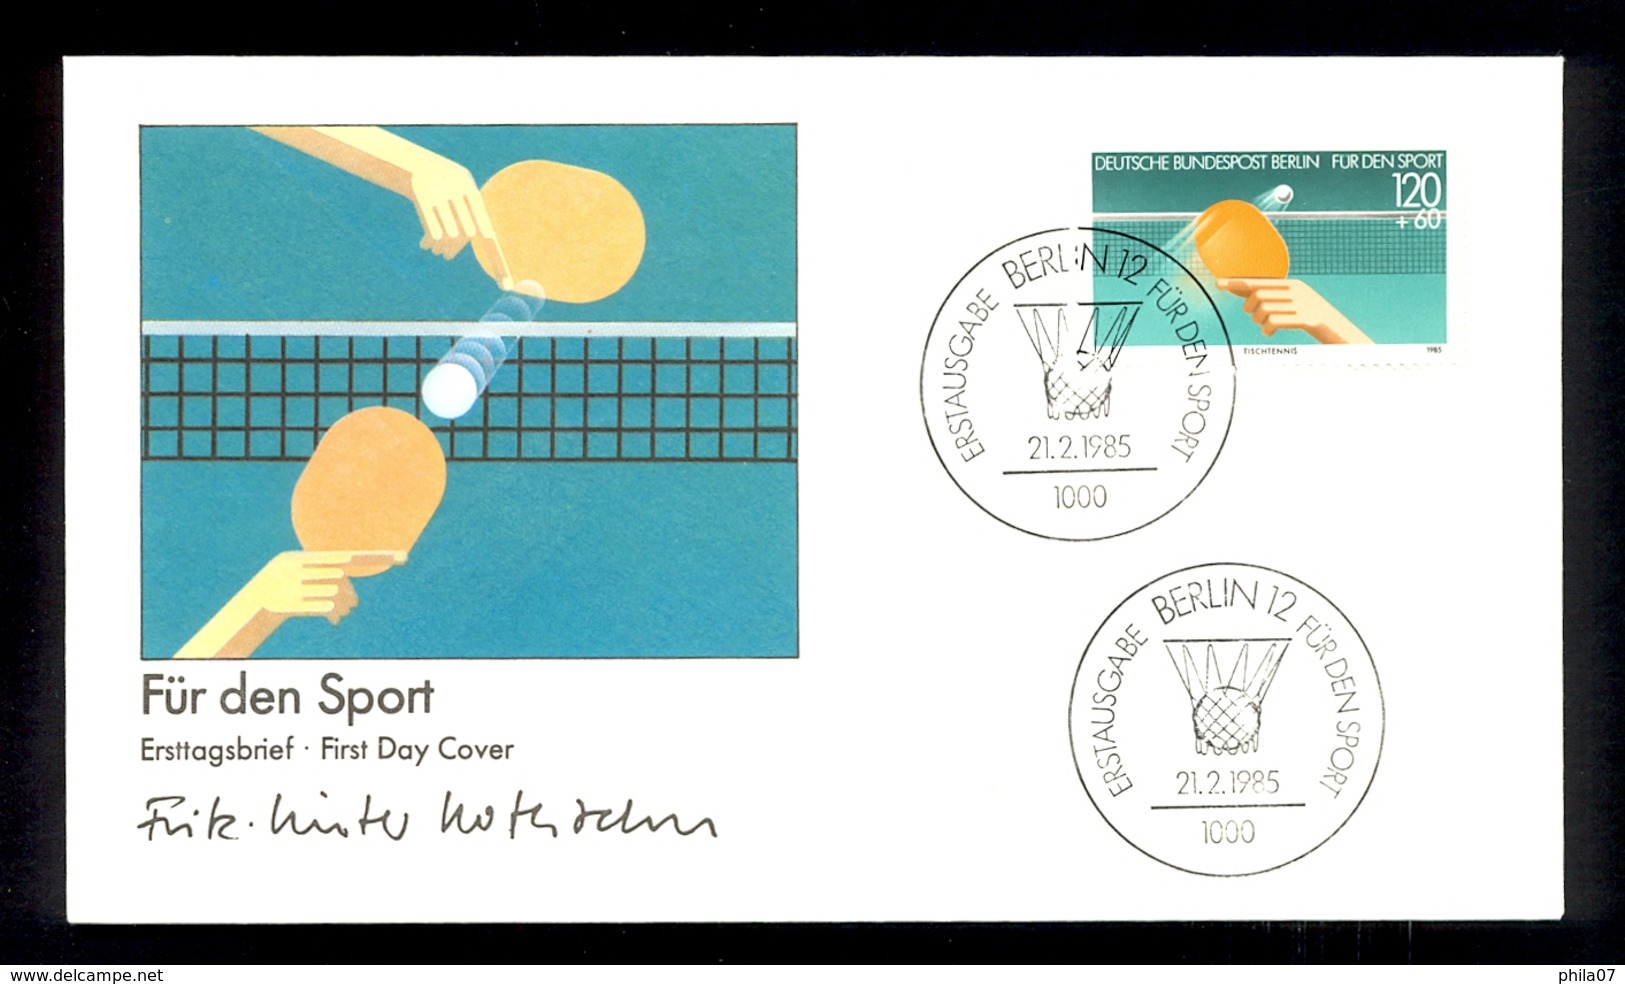 GERMANY 1985 - Commemorative Cover, Cancel And Stamp For TABLE TENNIS - Tenis De Mesa